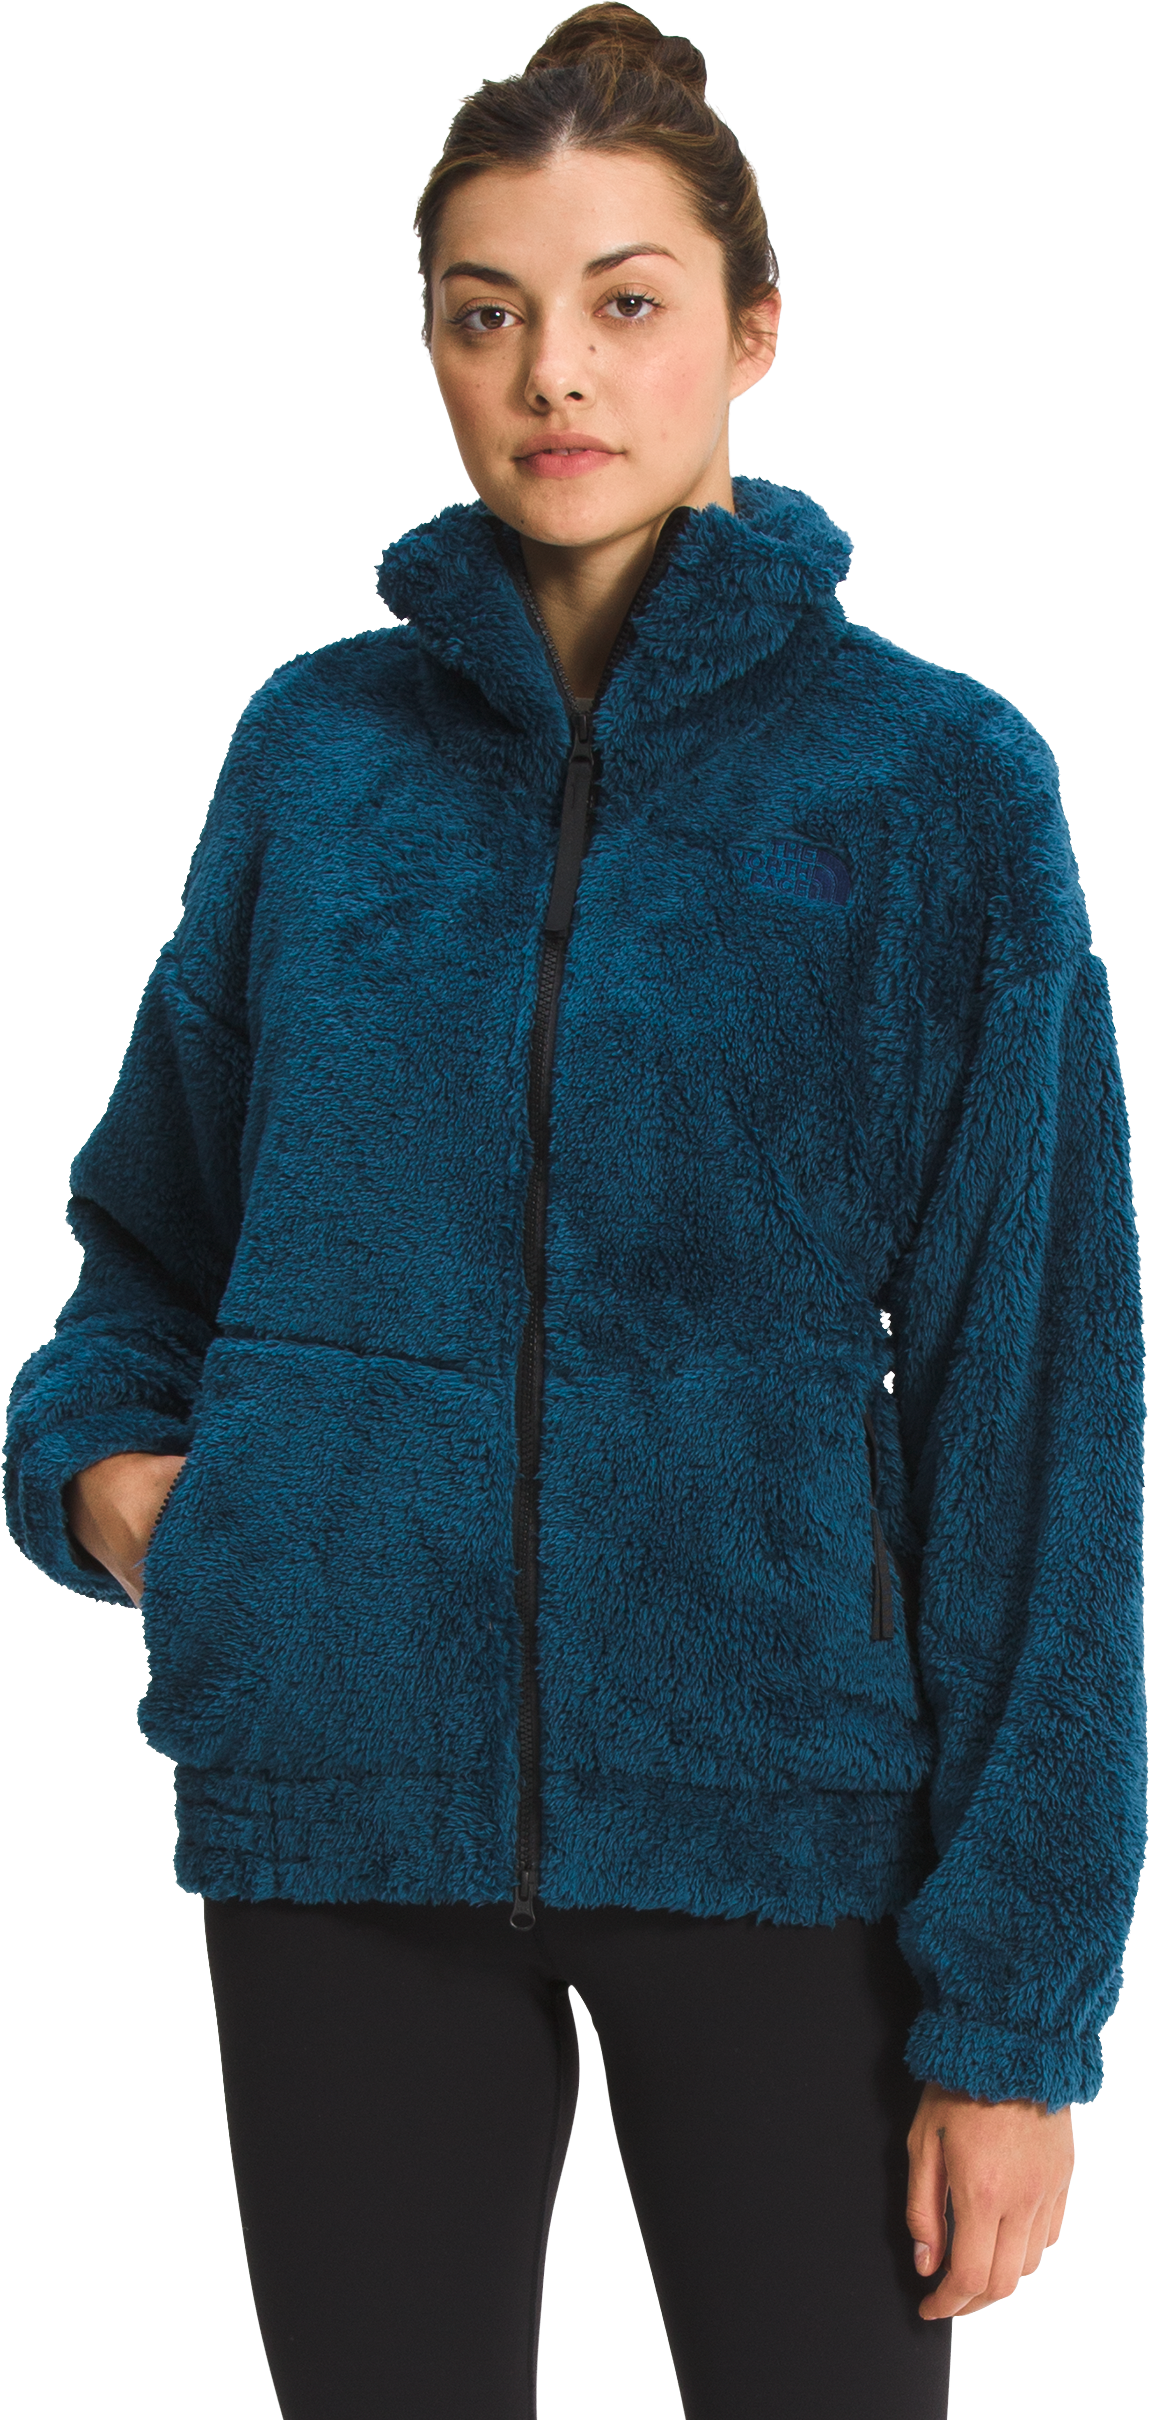 The North Face Osito Expedition Full-Zip Jacket for Ladies - Monterey Blue - XL product image